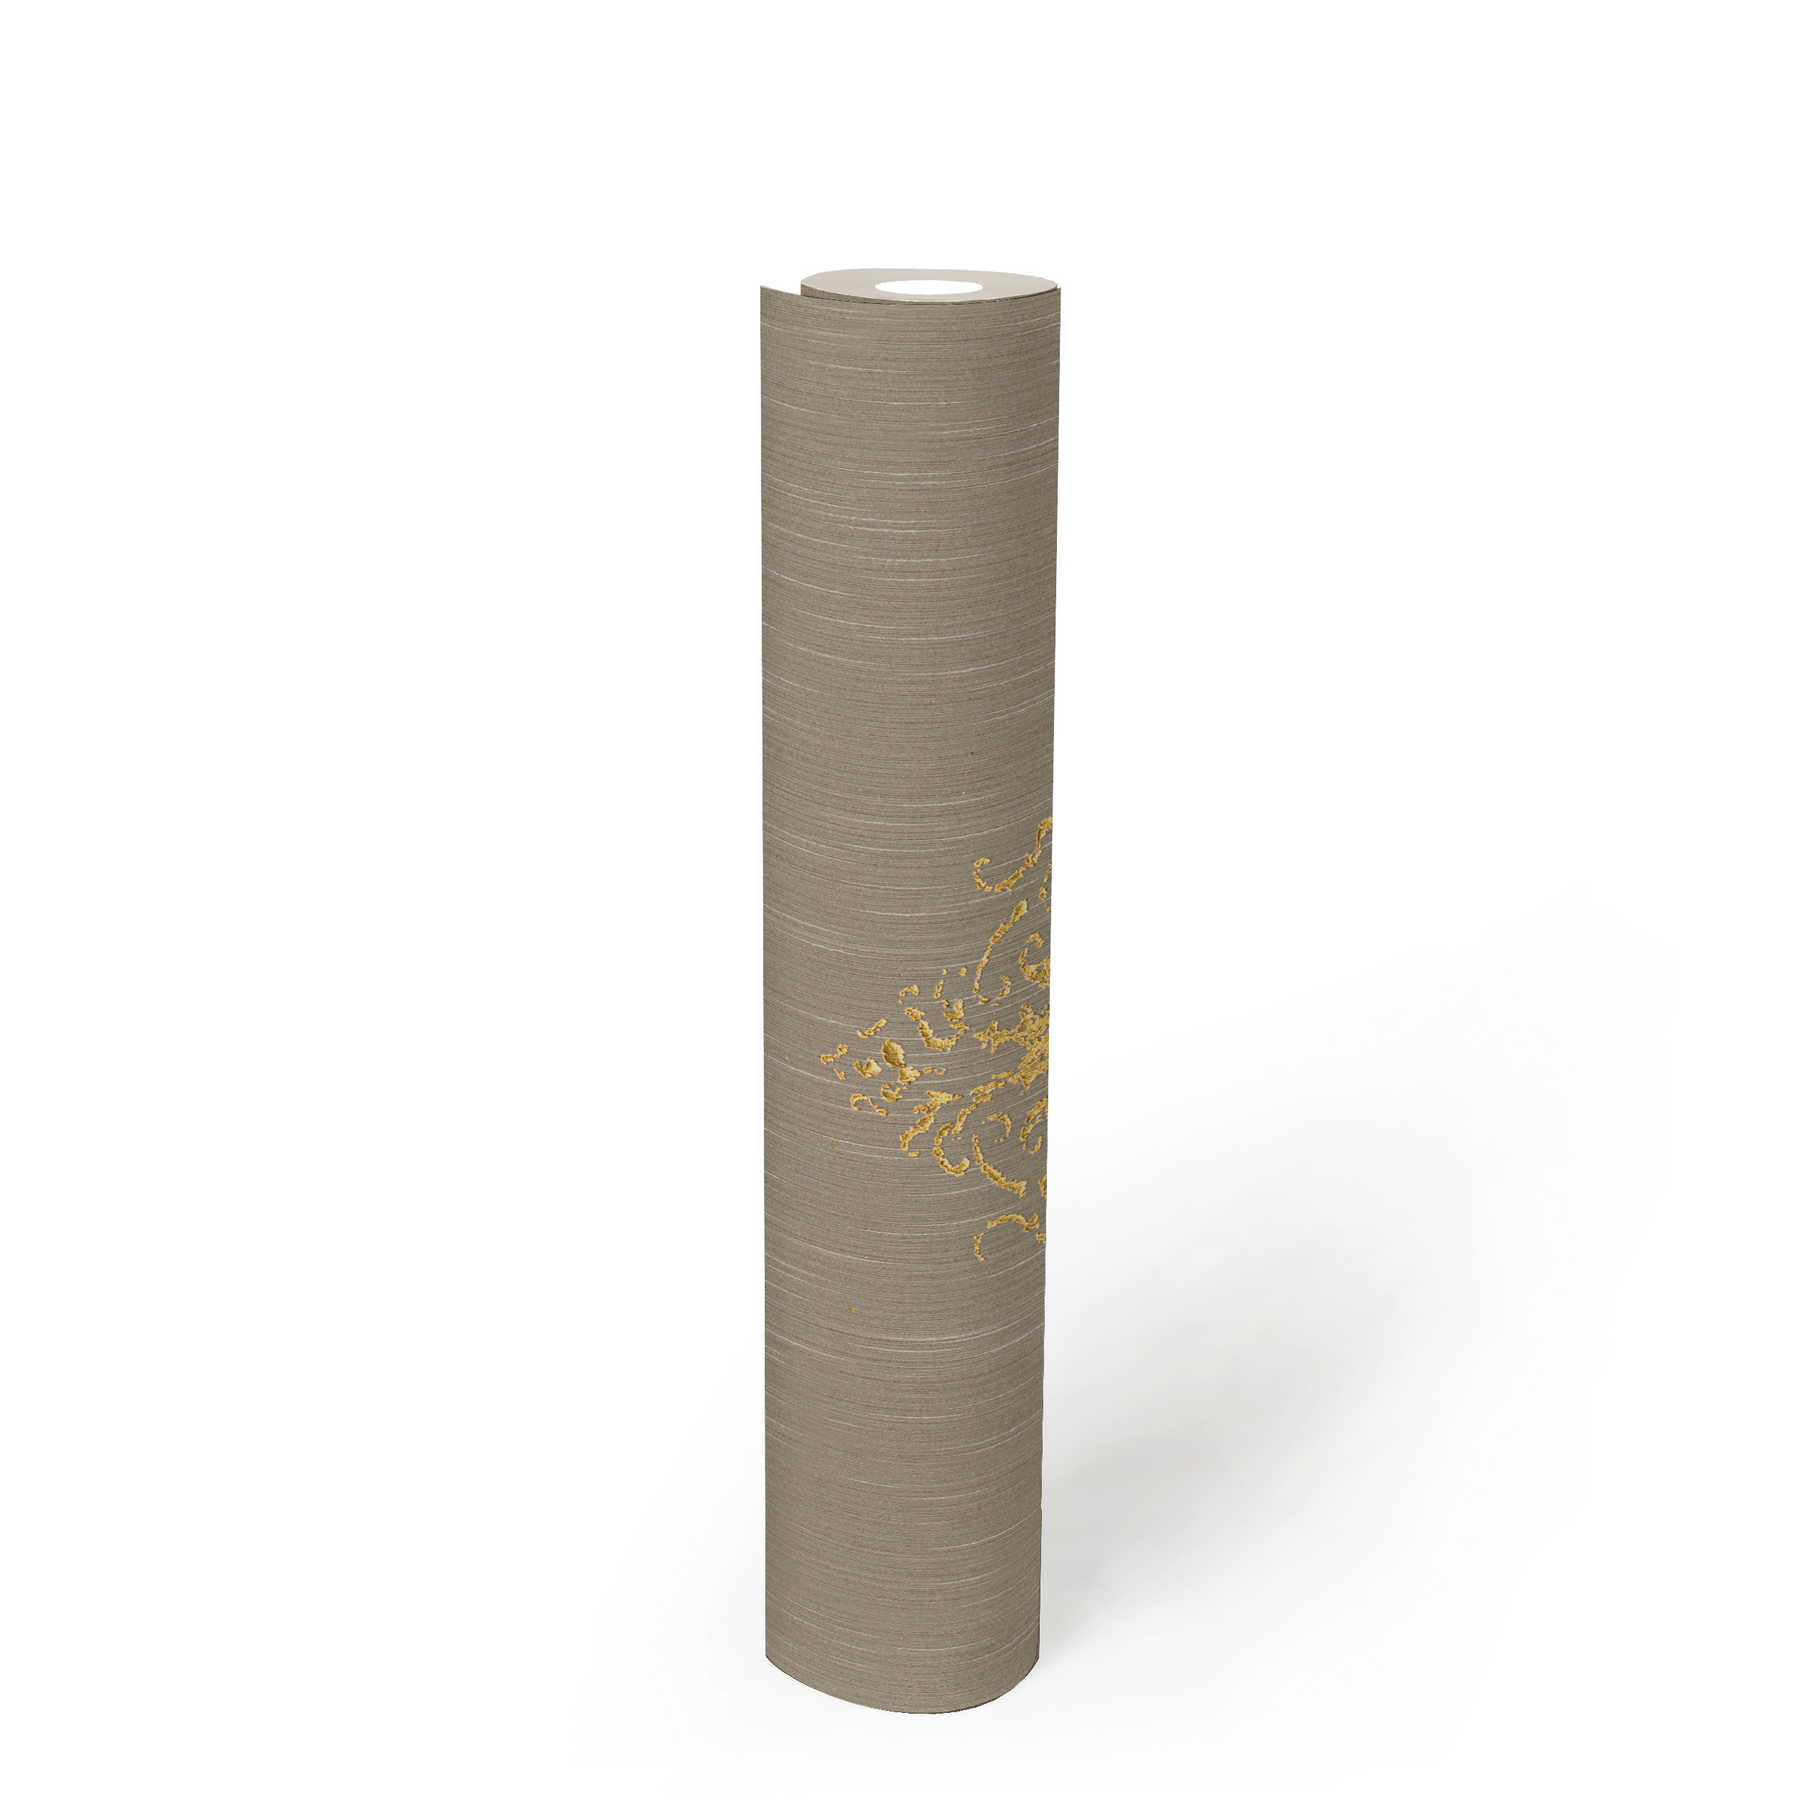             Ornament wallpaper with metallic effect in used look - beige, gold
        